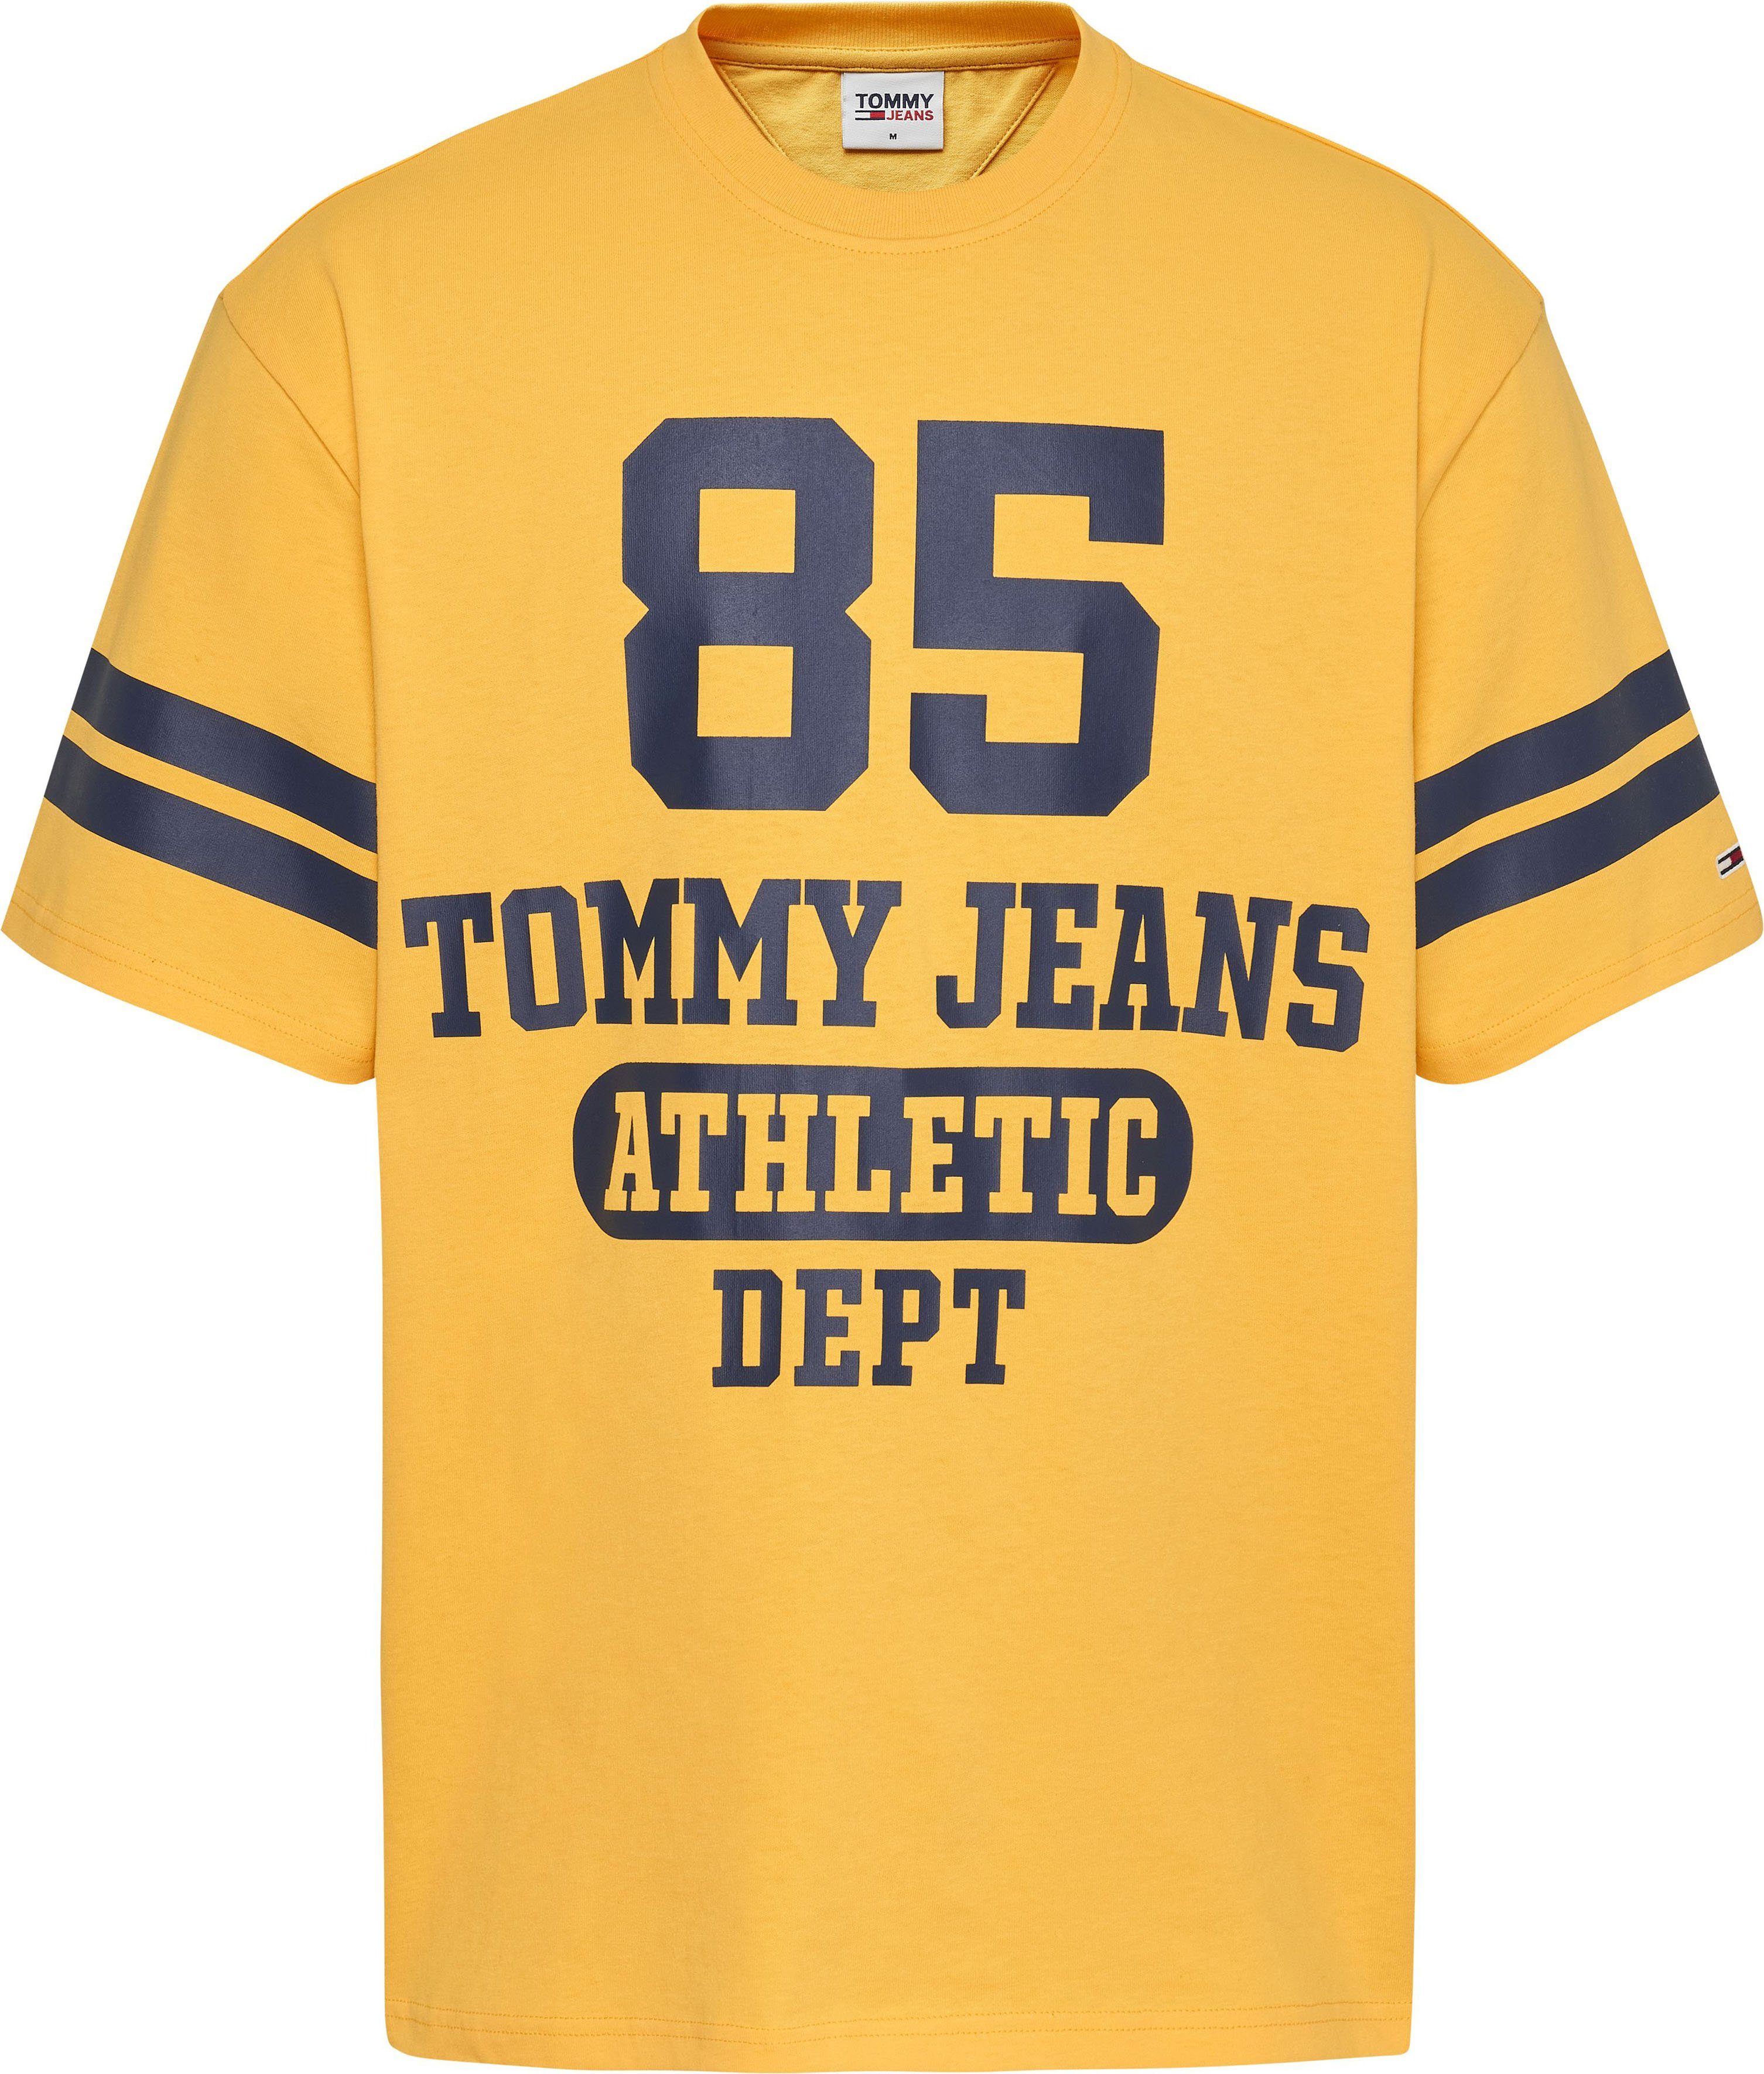 SKATER Yellow LOGO T-Shirt Jeans Warm TJM Tommy 85 COLLEGE